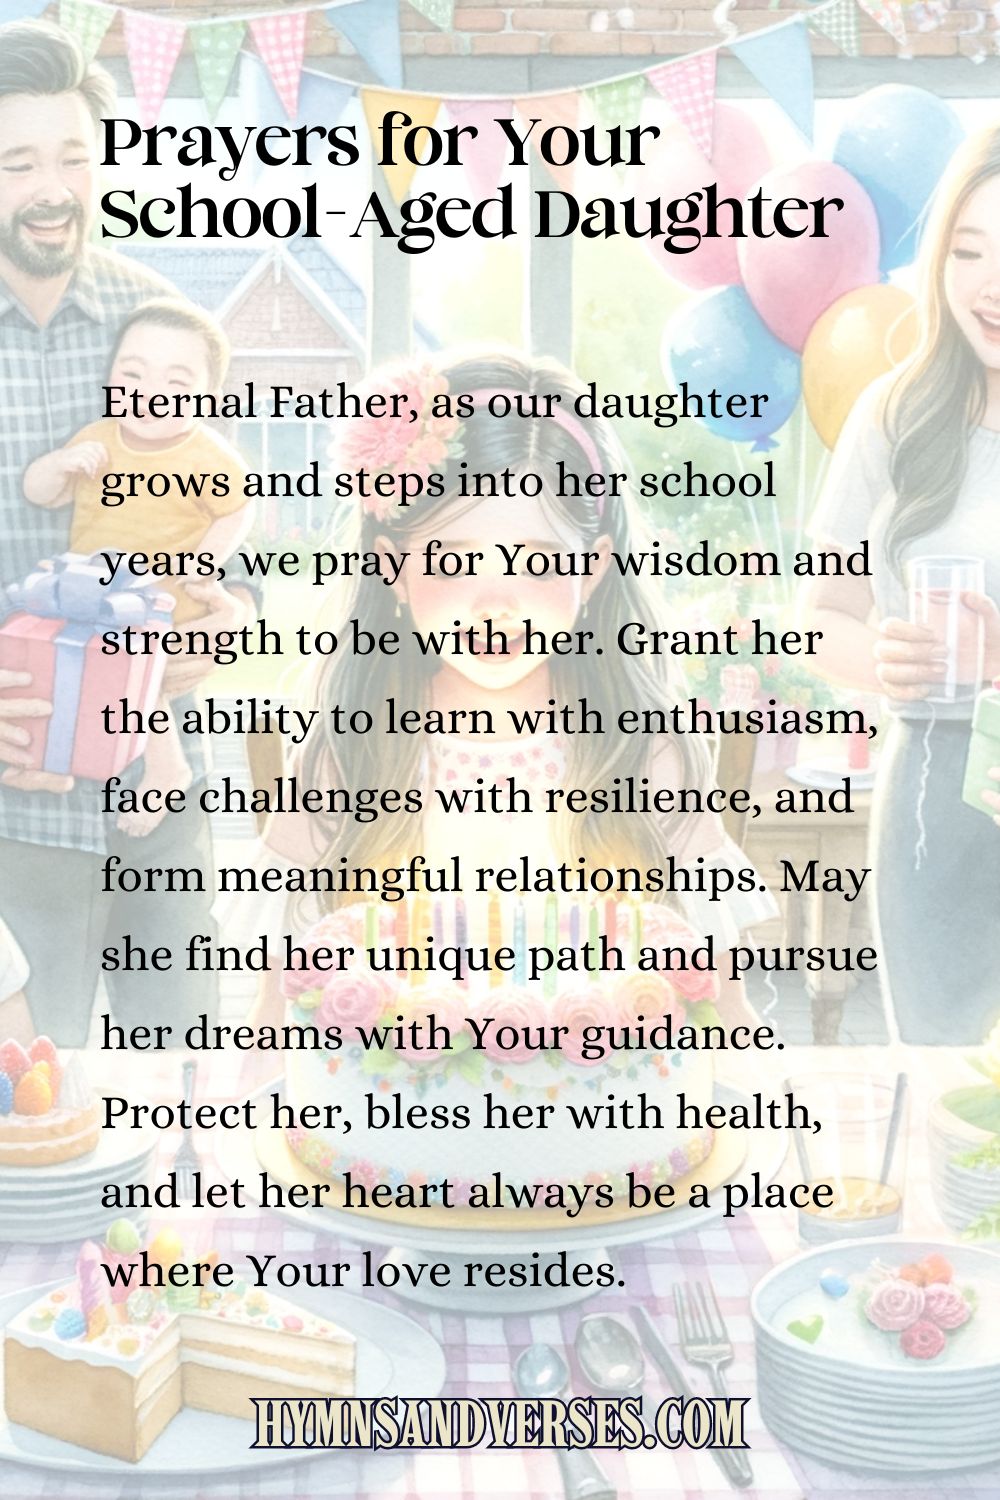 Pin image for Prayers for Your School-Aged Daughter, reads: Eternal Father, as our daughter grows and steps into her school years, we pray for Your wisdom and strength to be with her. Grant her the ability to learn with enthusiasm, face challenges with resilience, and form meaningful relationships. May she find her unique path and pursue her dreams with Your guidance. Protect her, bless her with health, and let her heart always be a place where Your love resides.